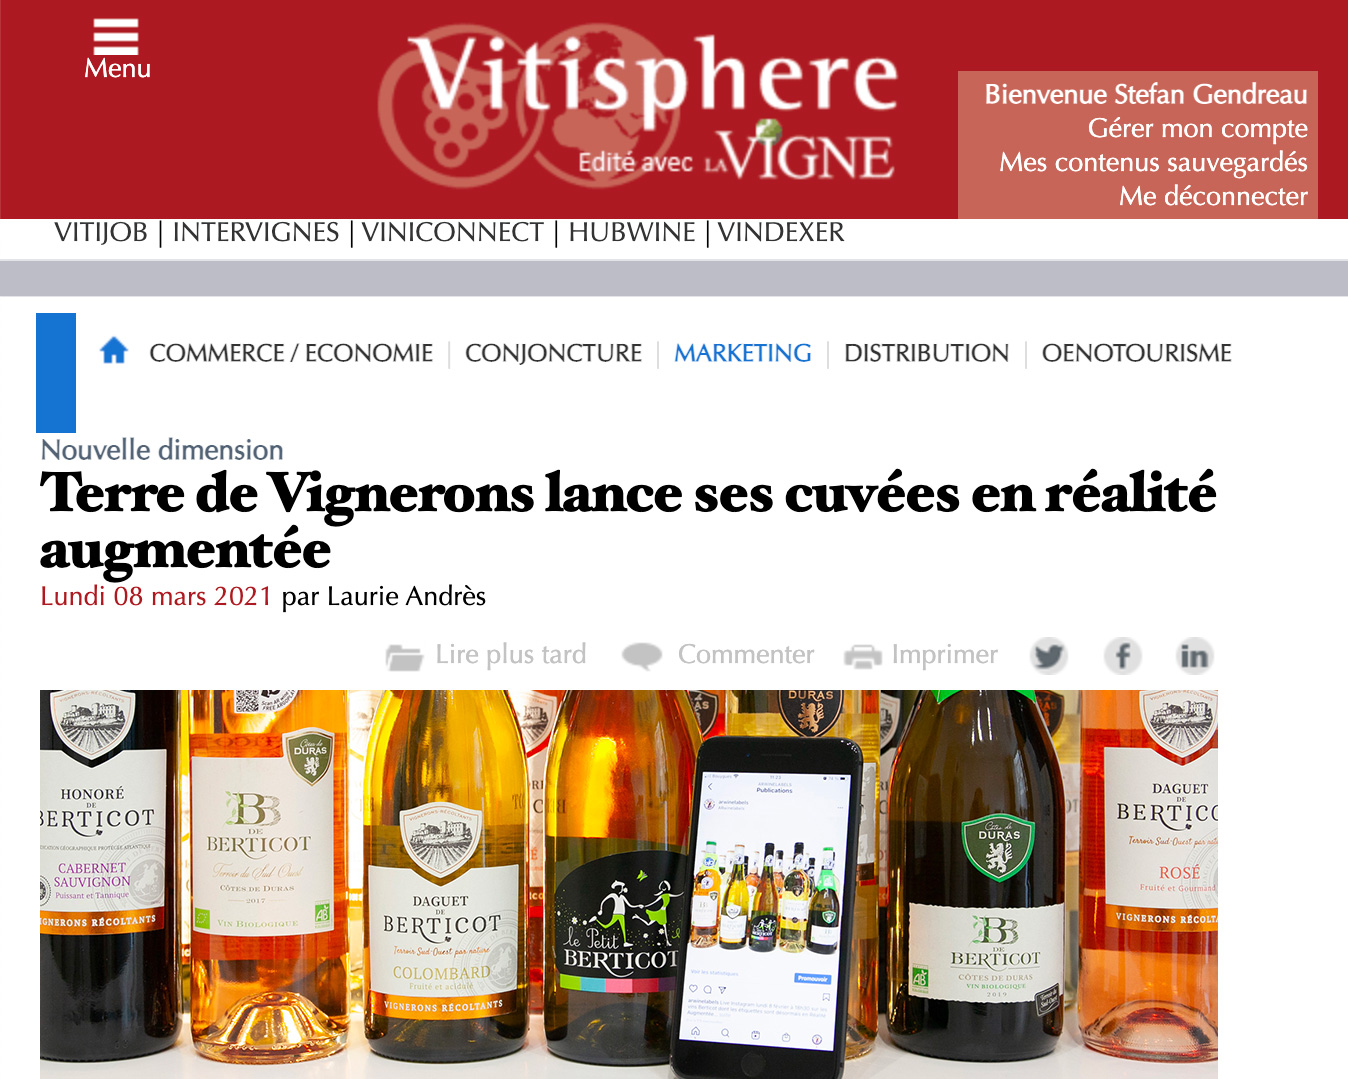 Terre de Vignerons launches its cuvées using Augmented Reality